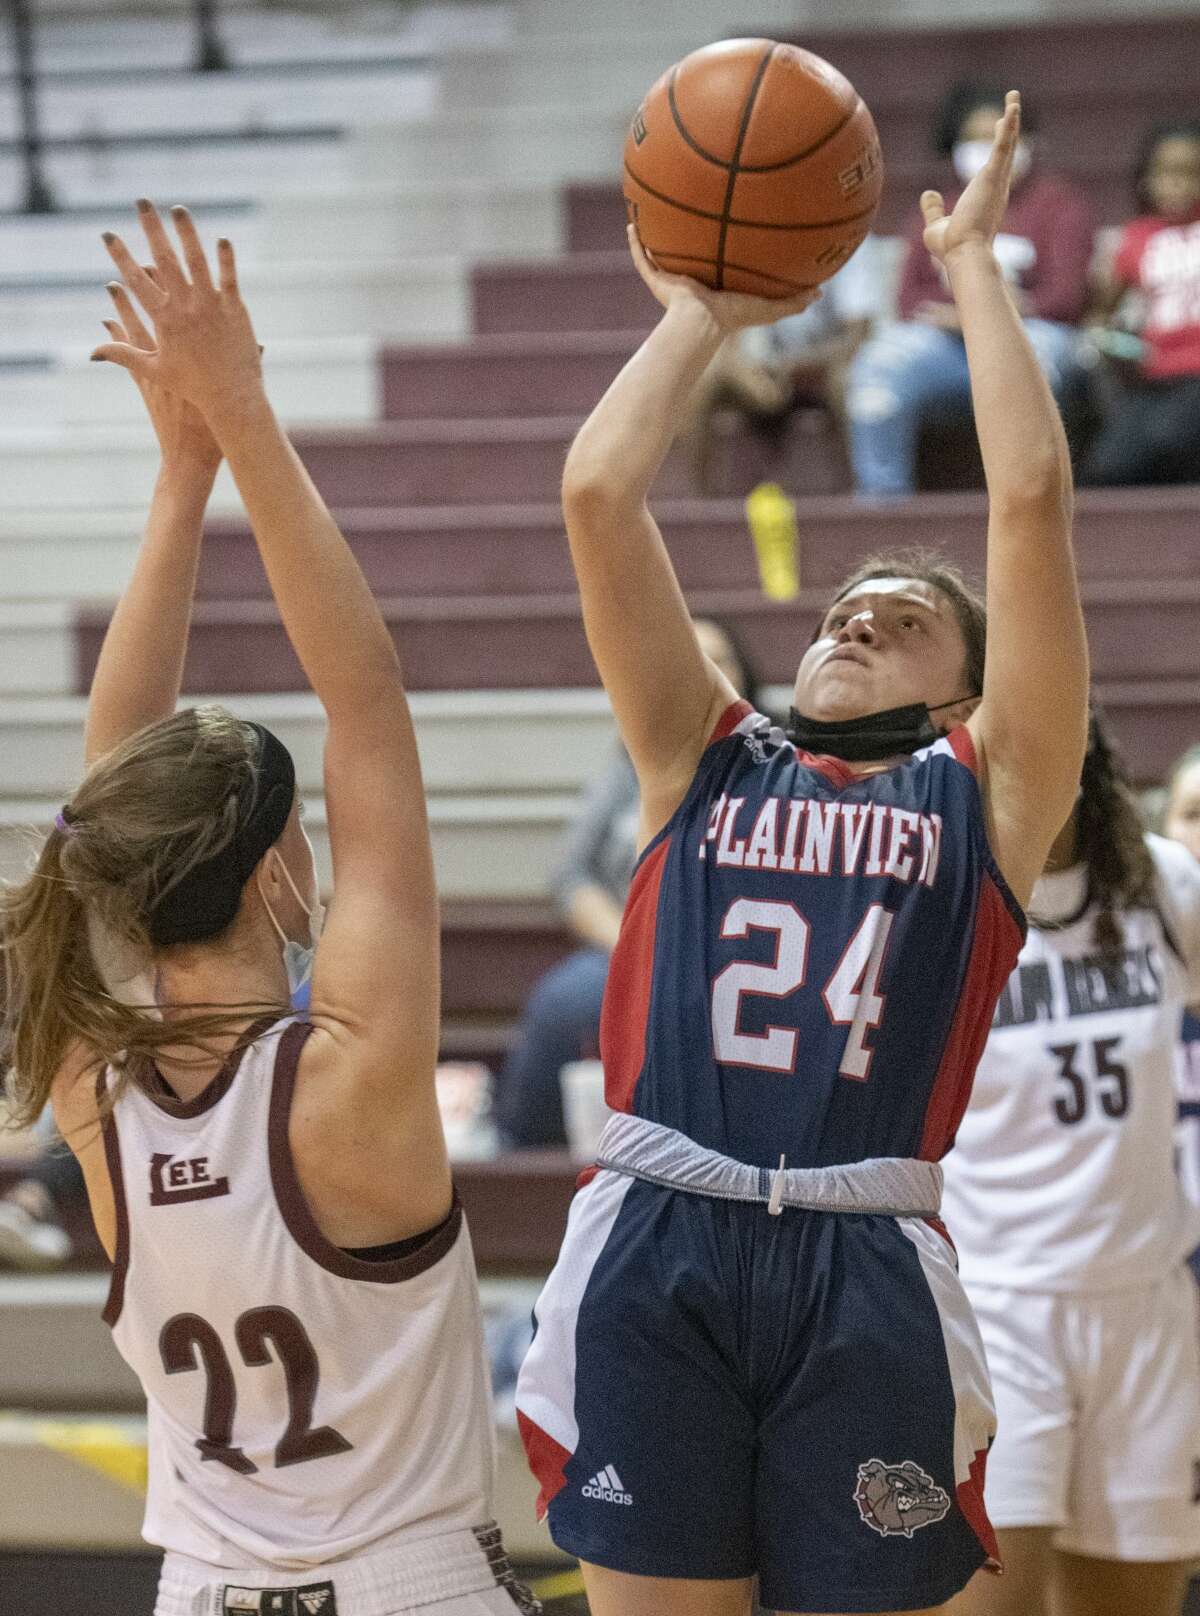 Plainview's Janessa Pauda pulls up for a shot as Lee High's Maggie Erdwurm defends 12/29/2020 at the Lee High gym. Tim Fischer/Reporter-Telegram